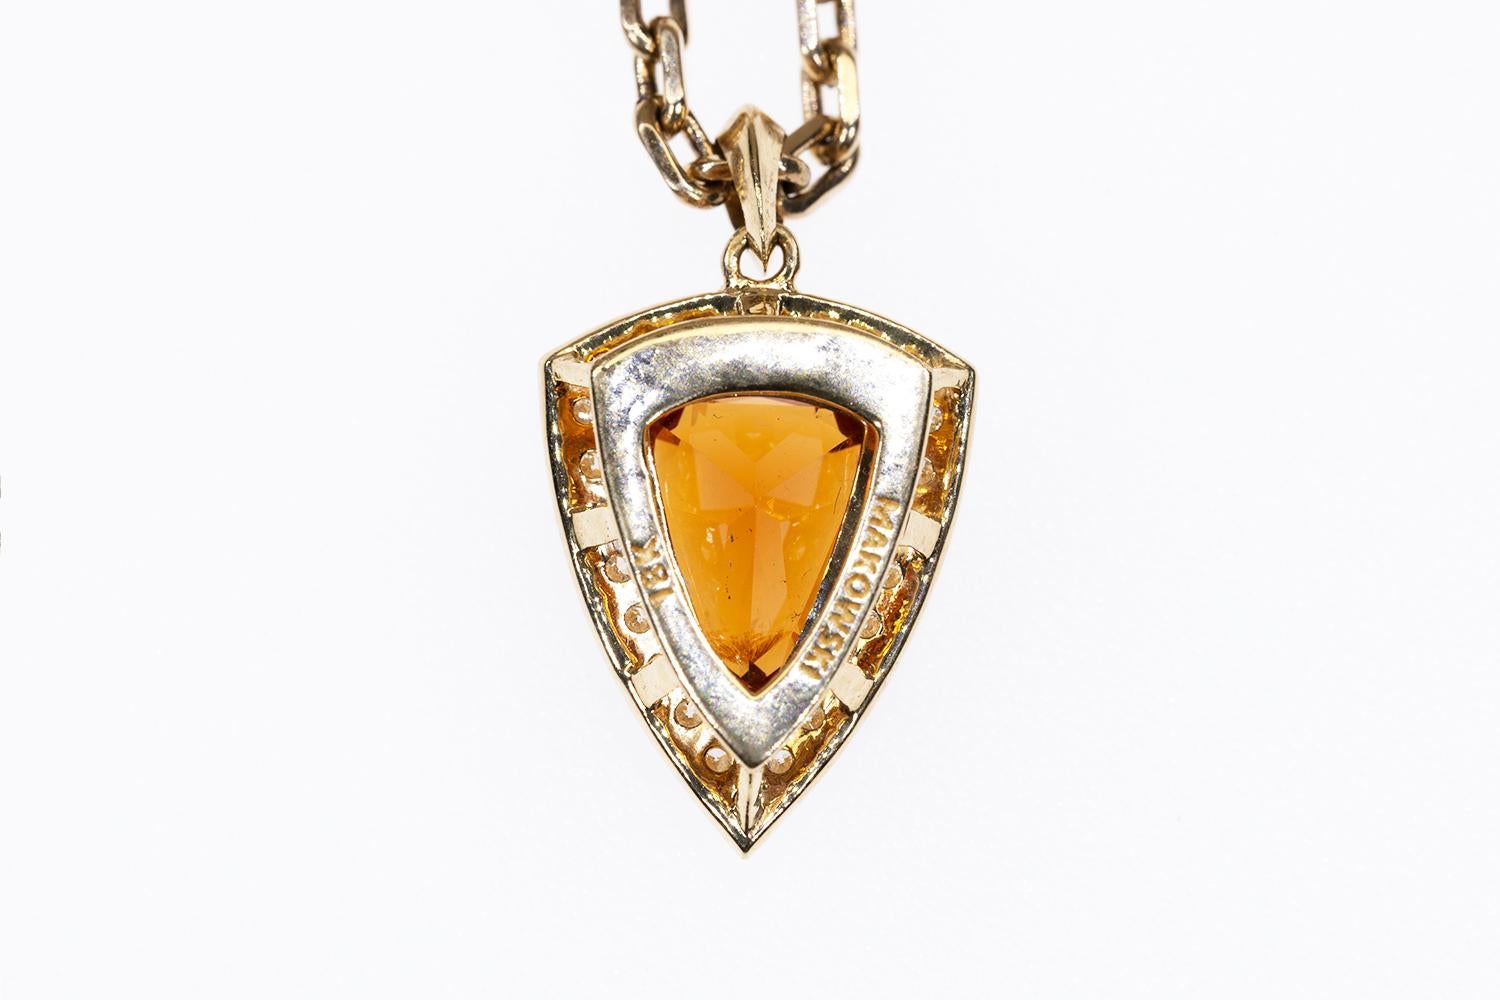 3.52 Carat Hessonite Garnet Pendant with Diamond Halo set in 18K Yellow Gold In New Condition For Sale In Manchester By The Sea, MA